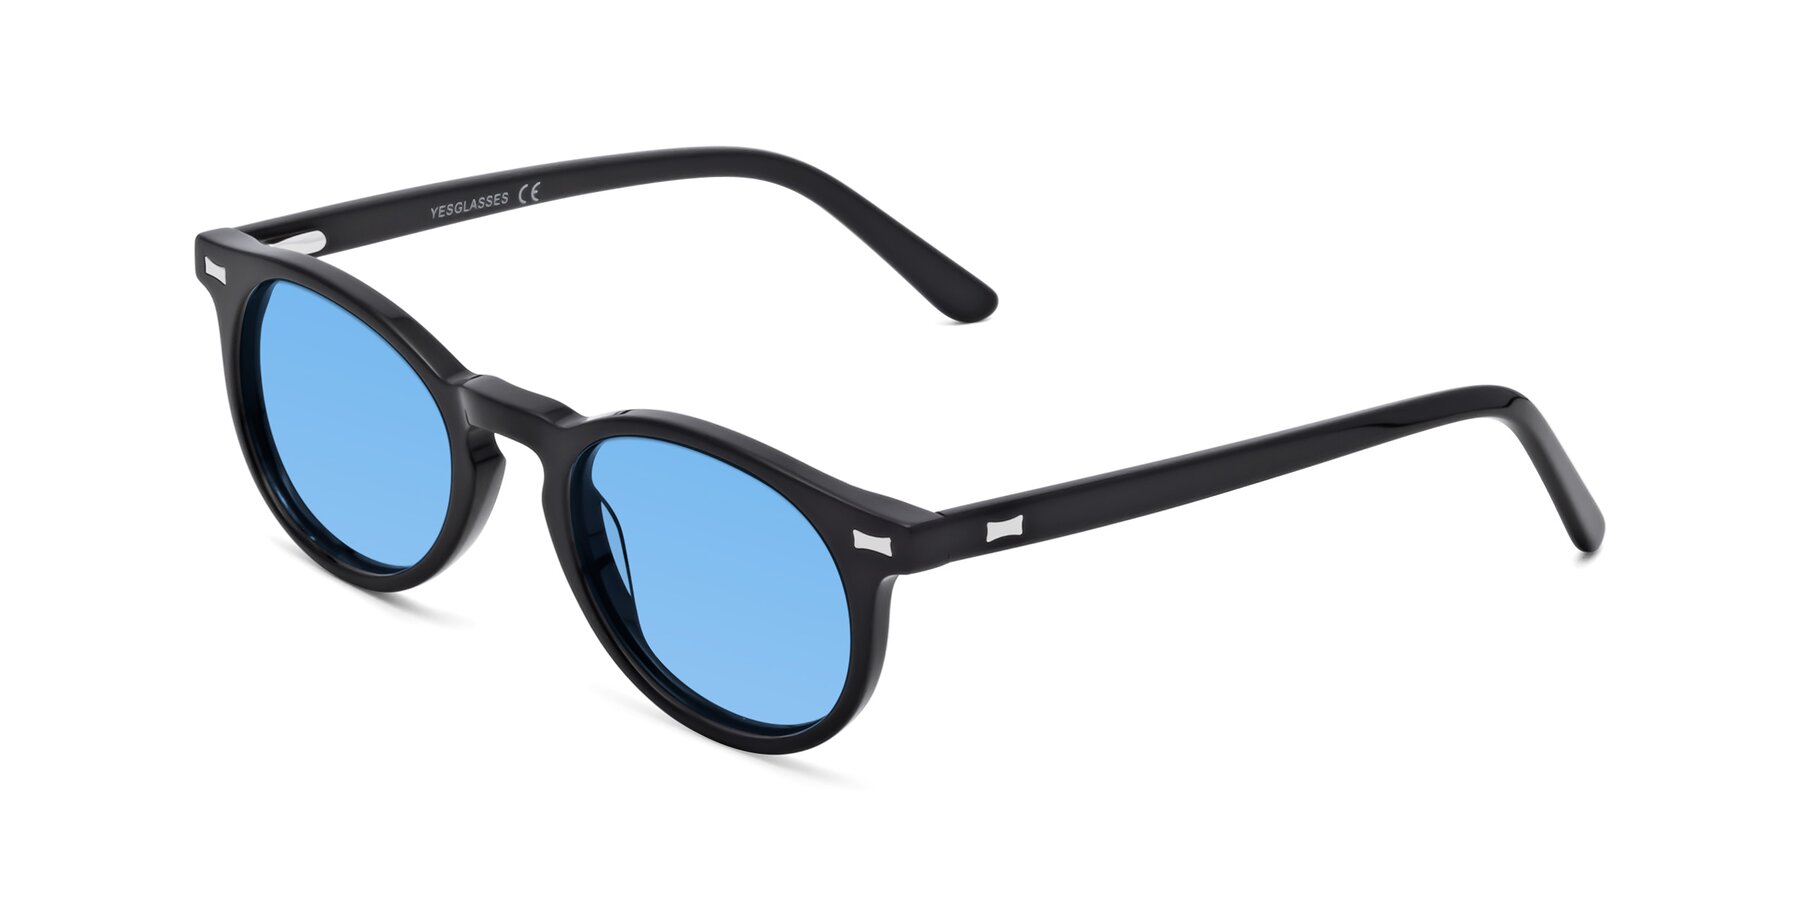 Angle of 17330 in Black with Medium Blue Tinted Lenses